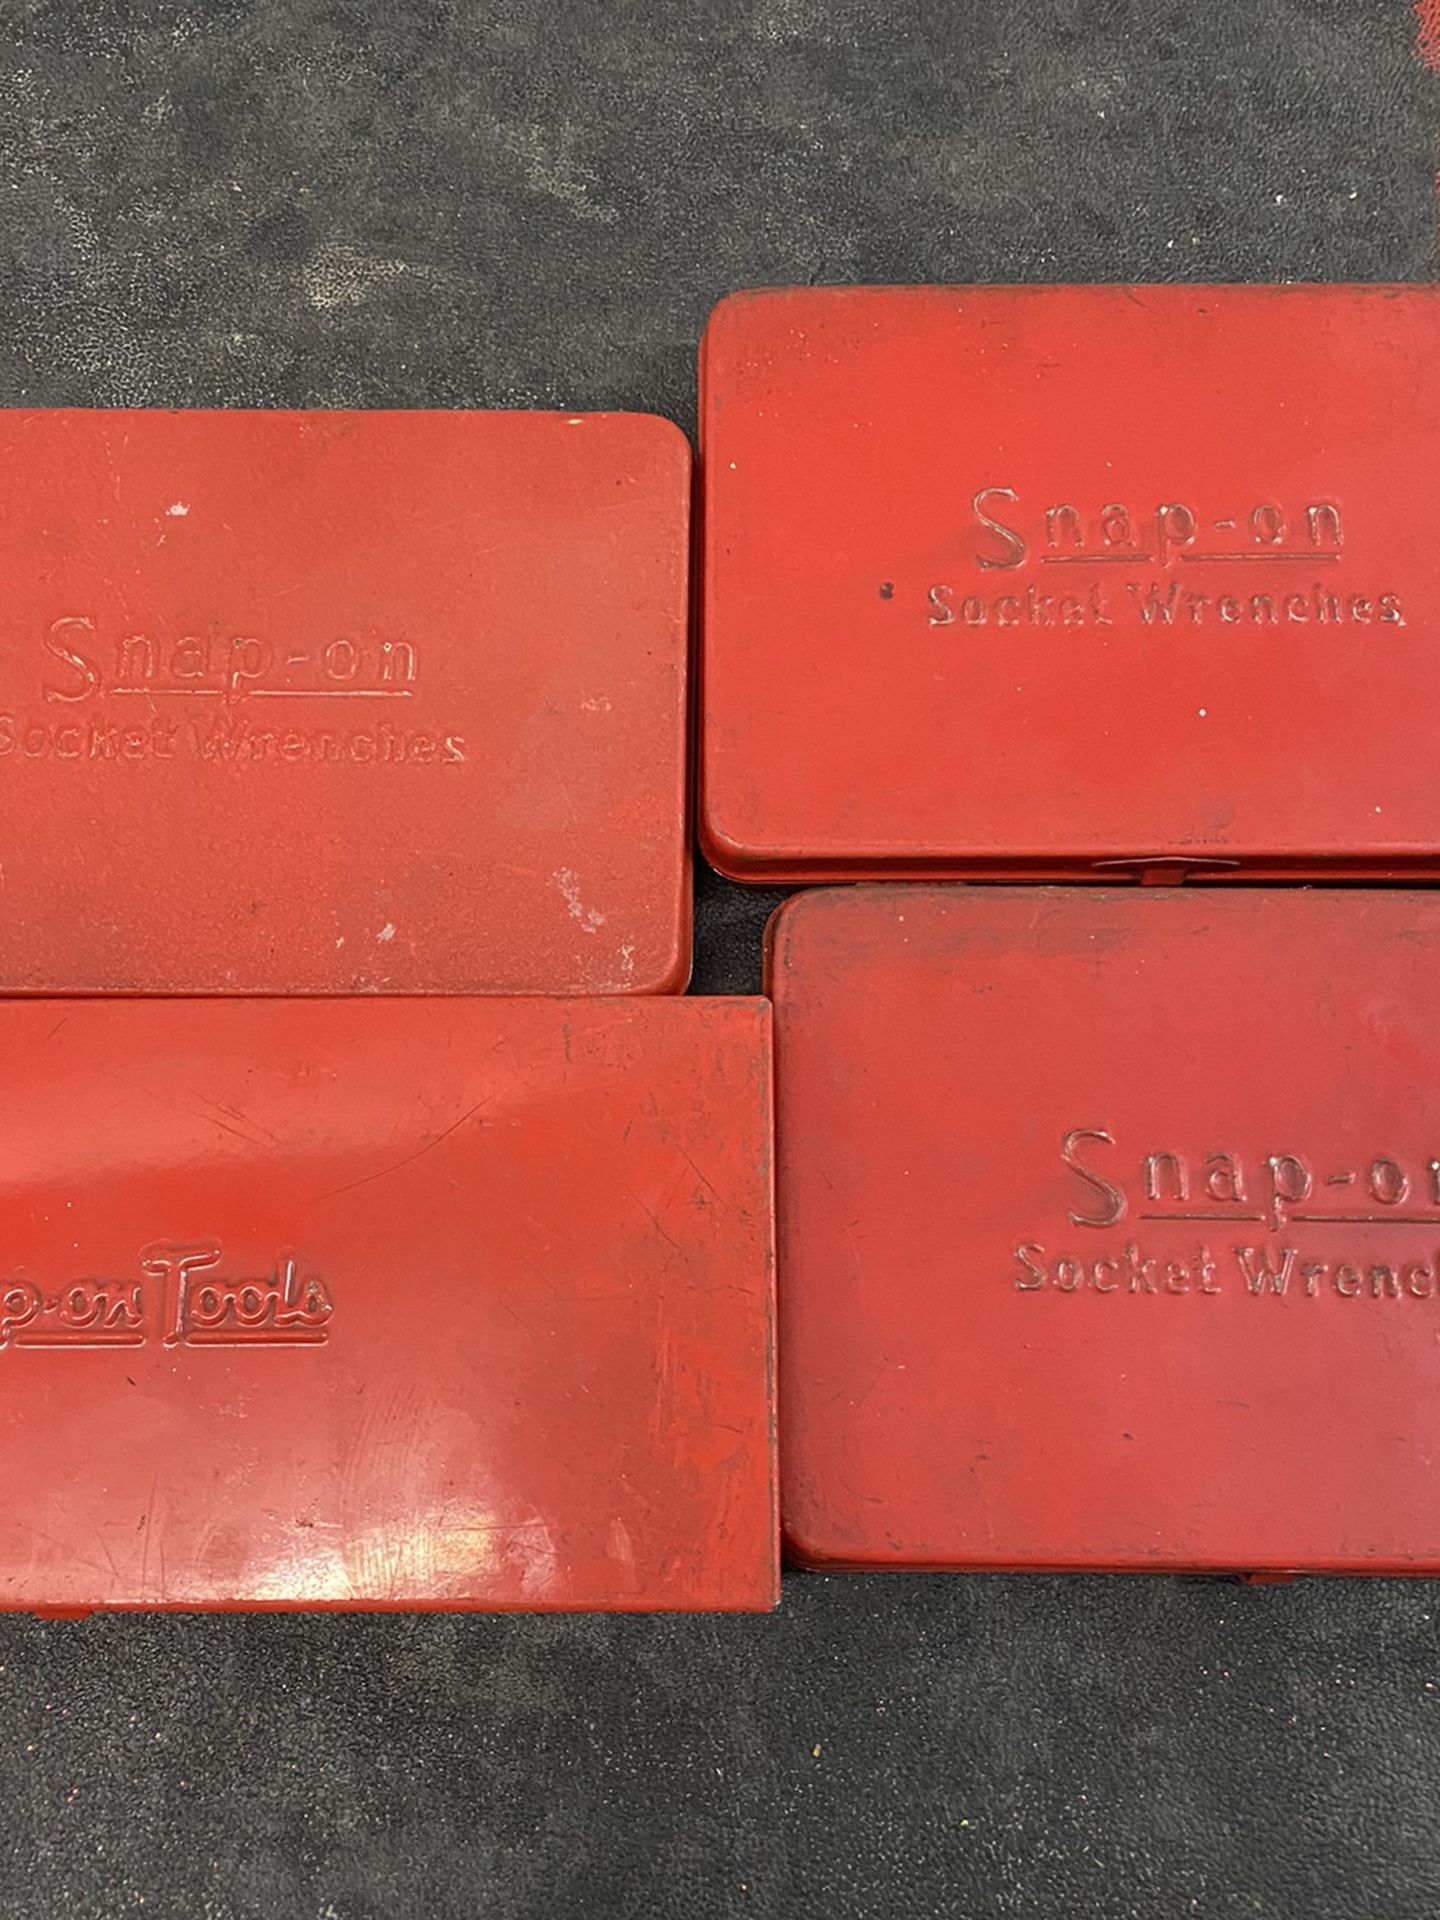 4 Empty Snap On Tool Cases